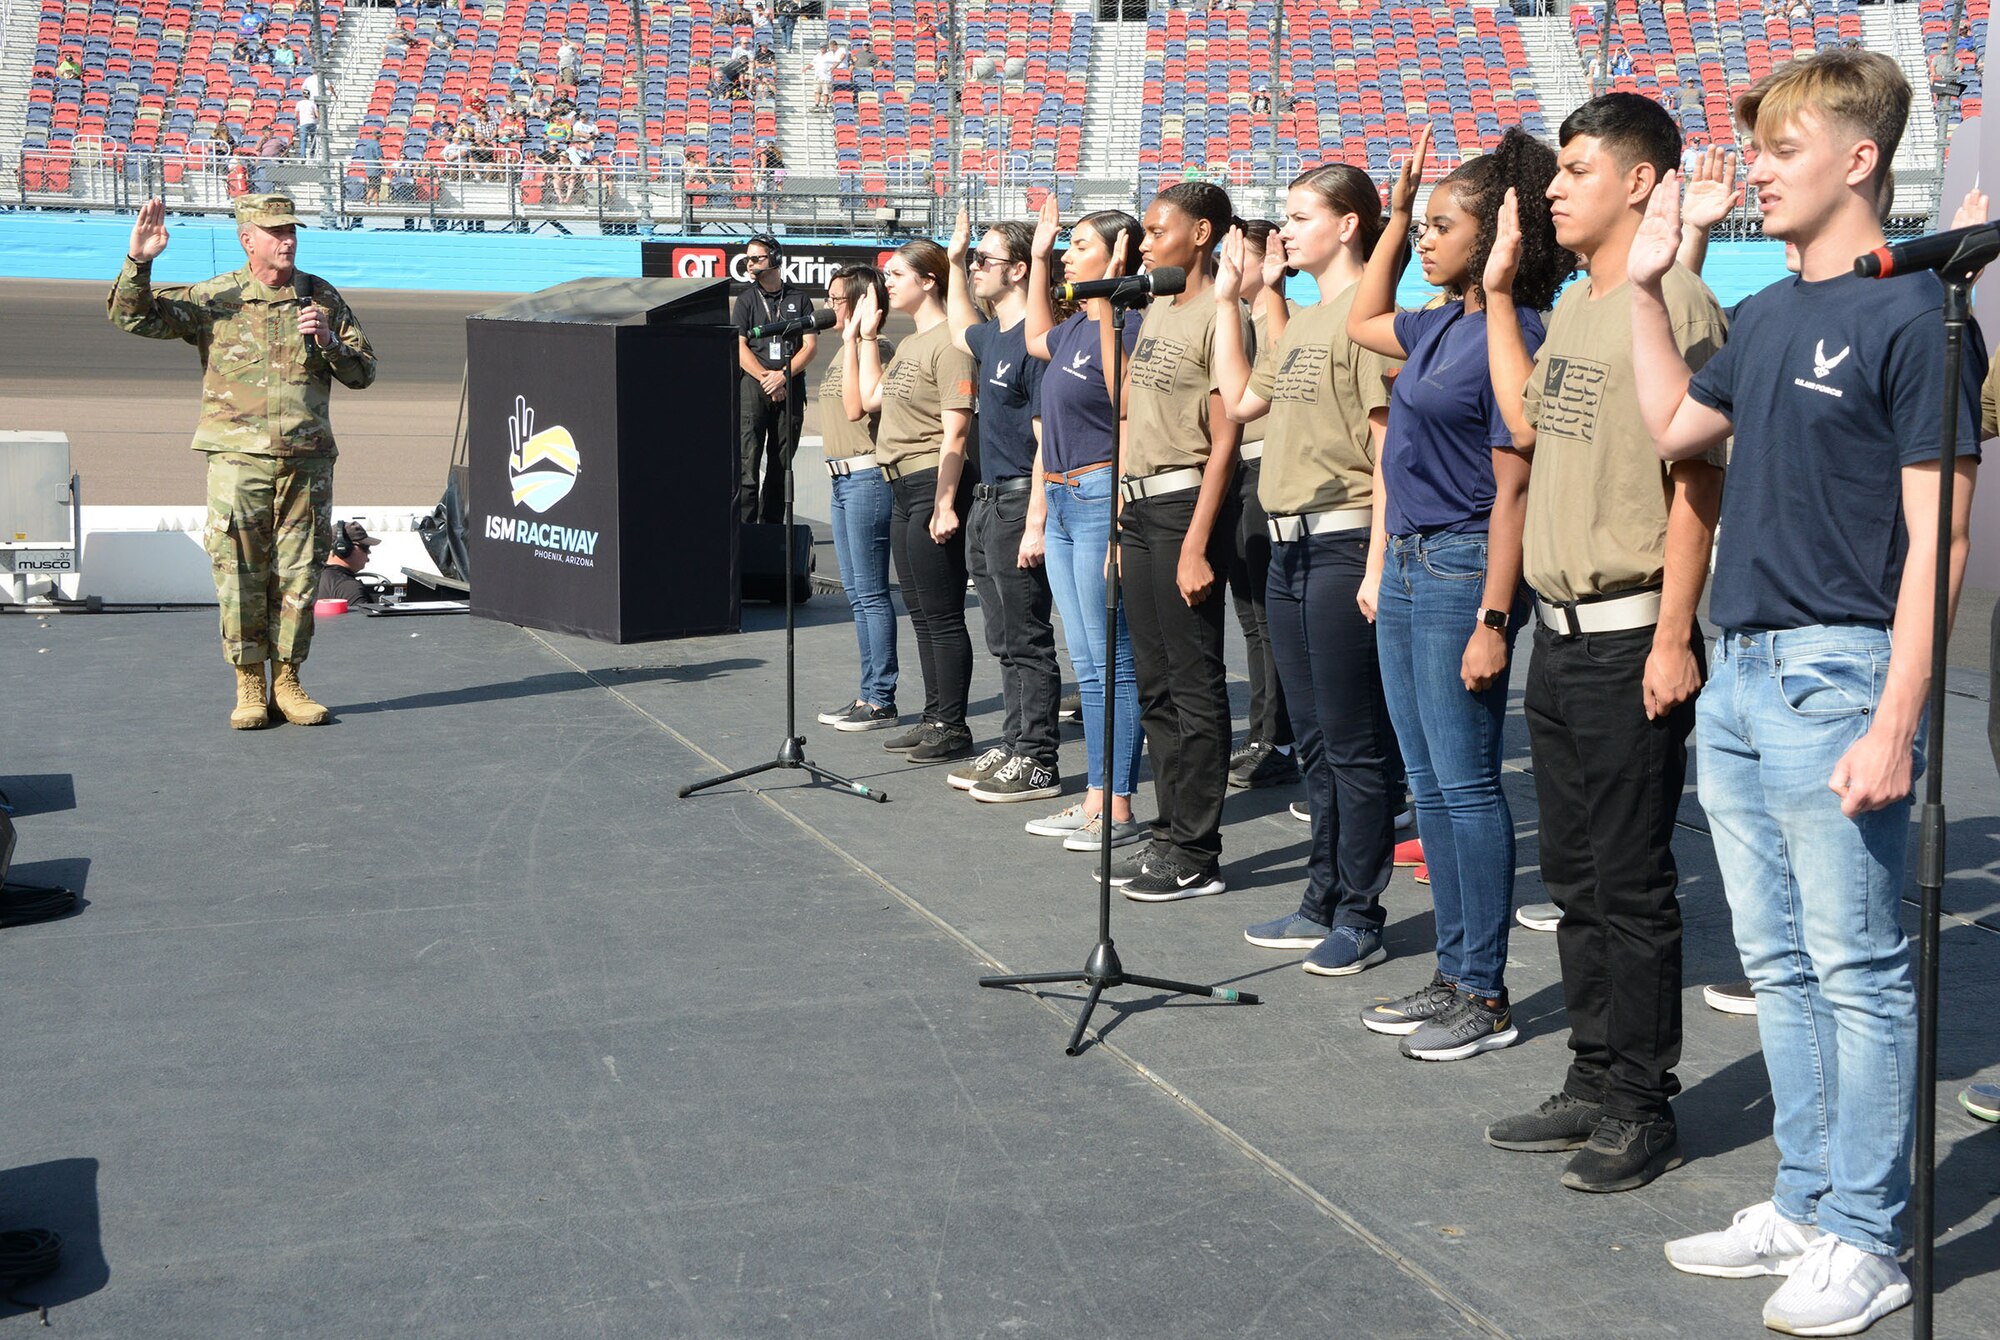 Gen. David L. Goldfein, Air Force chief of staff, conducts a total force enlistment prior to the NASCAR race Sunday in Phoenix